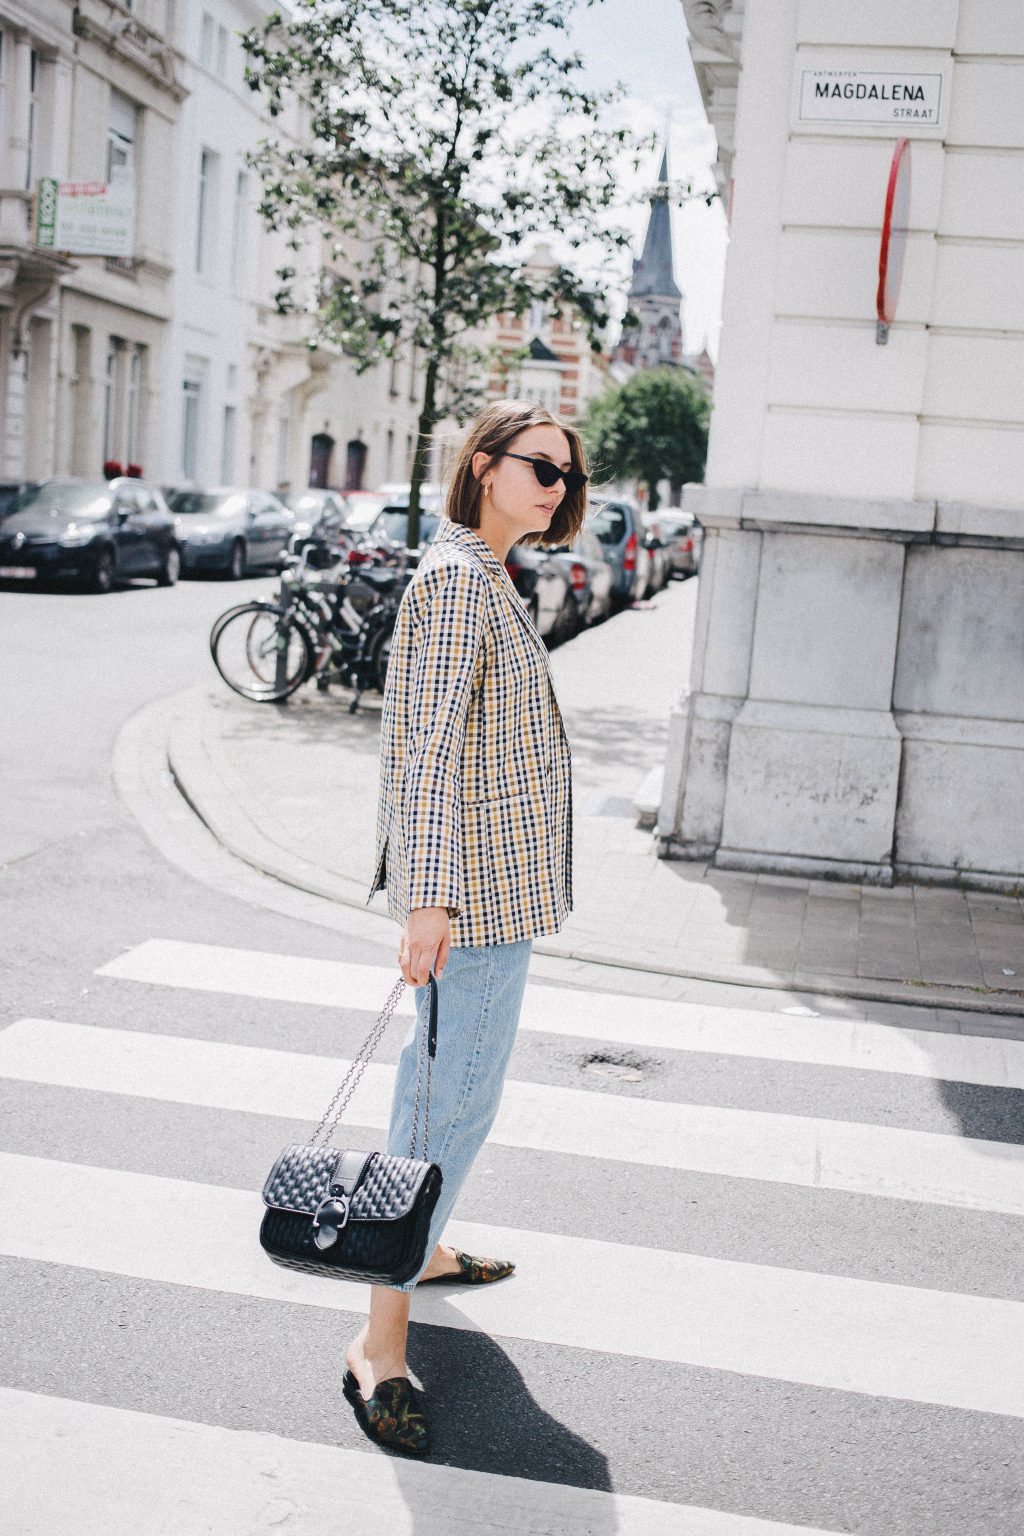 Steal Her Style: Classics for the weekend | Love Daily Dose